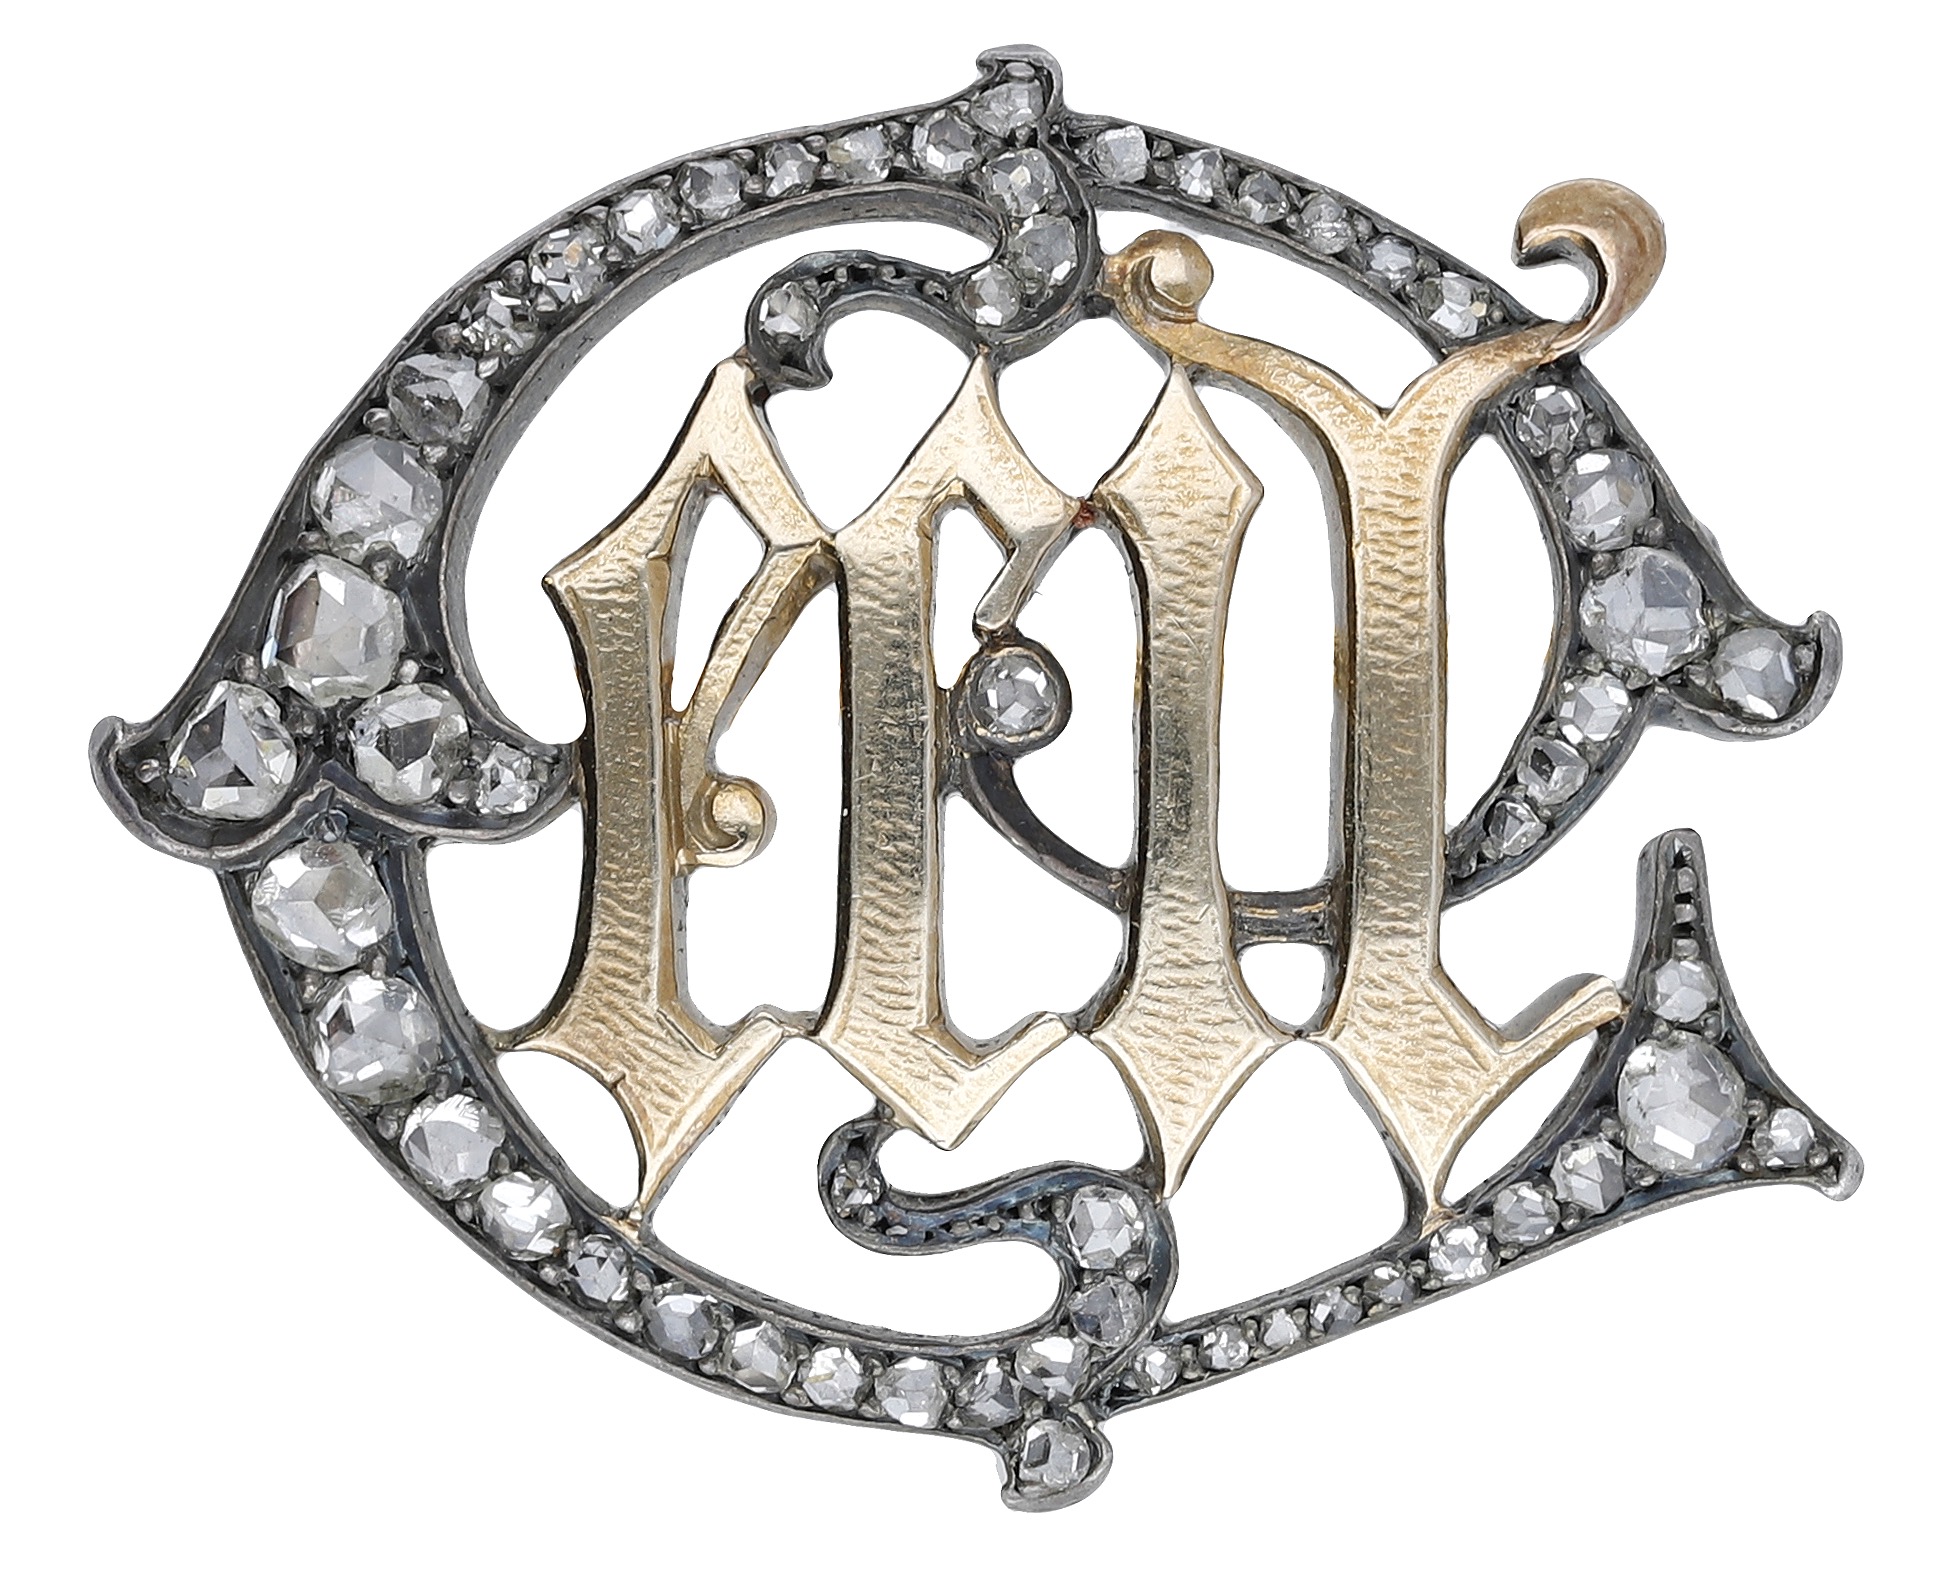 A diamond monogram brooch, circa 1890 - 1900, the gold initials in Gothic script in a stylis...